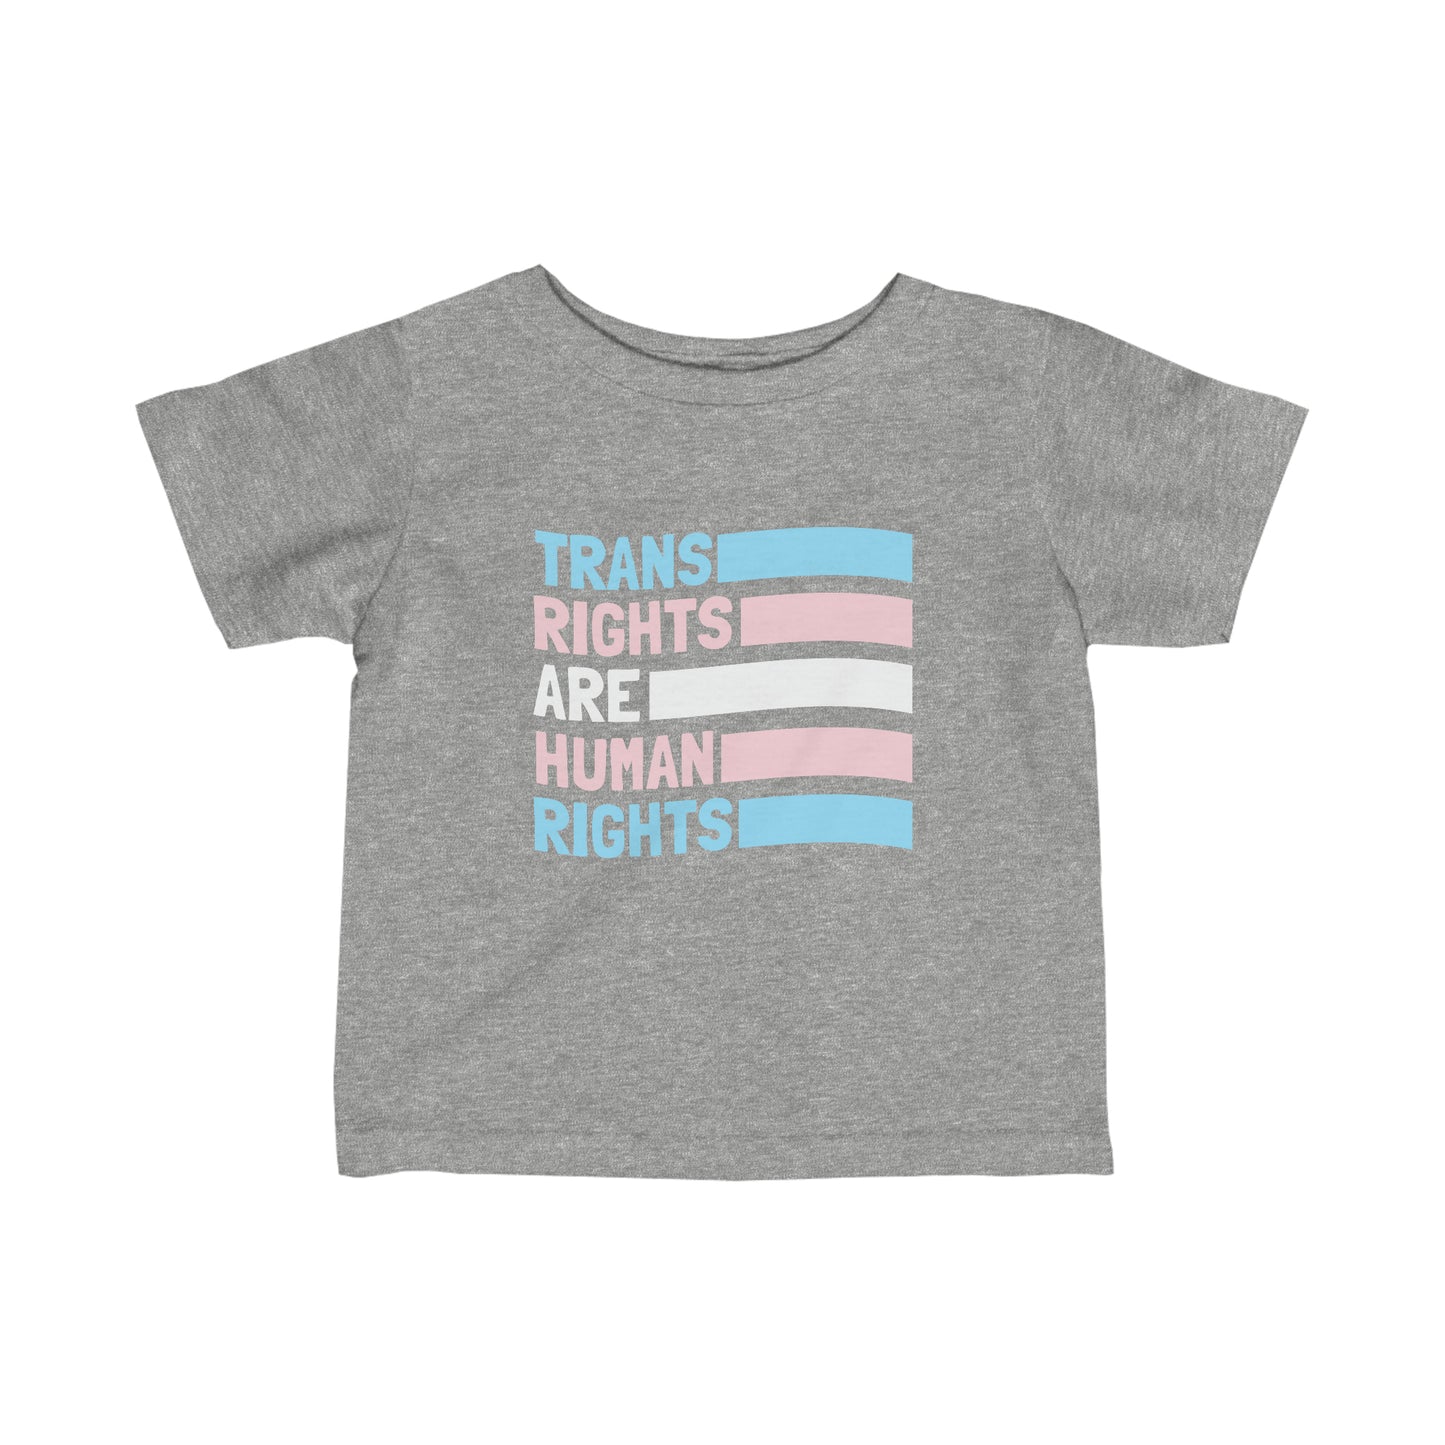 “Trans Rights Are Human Rights” Infant Tee